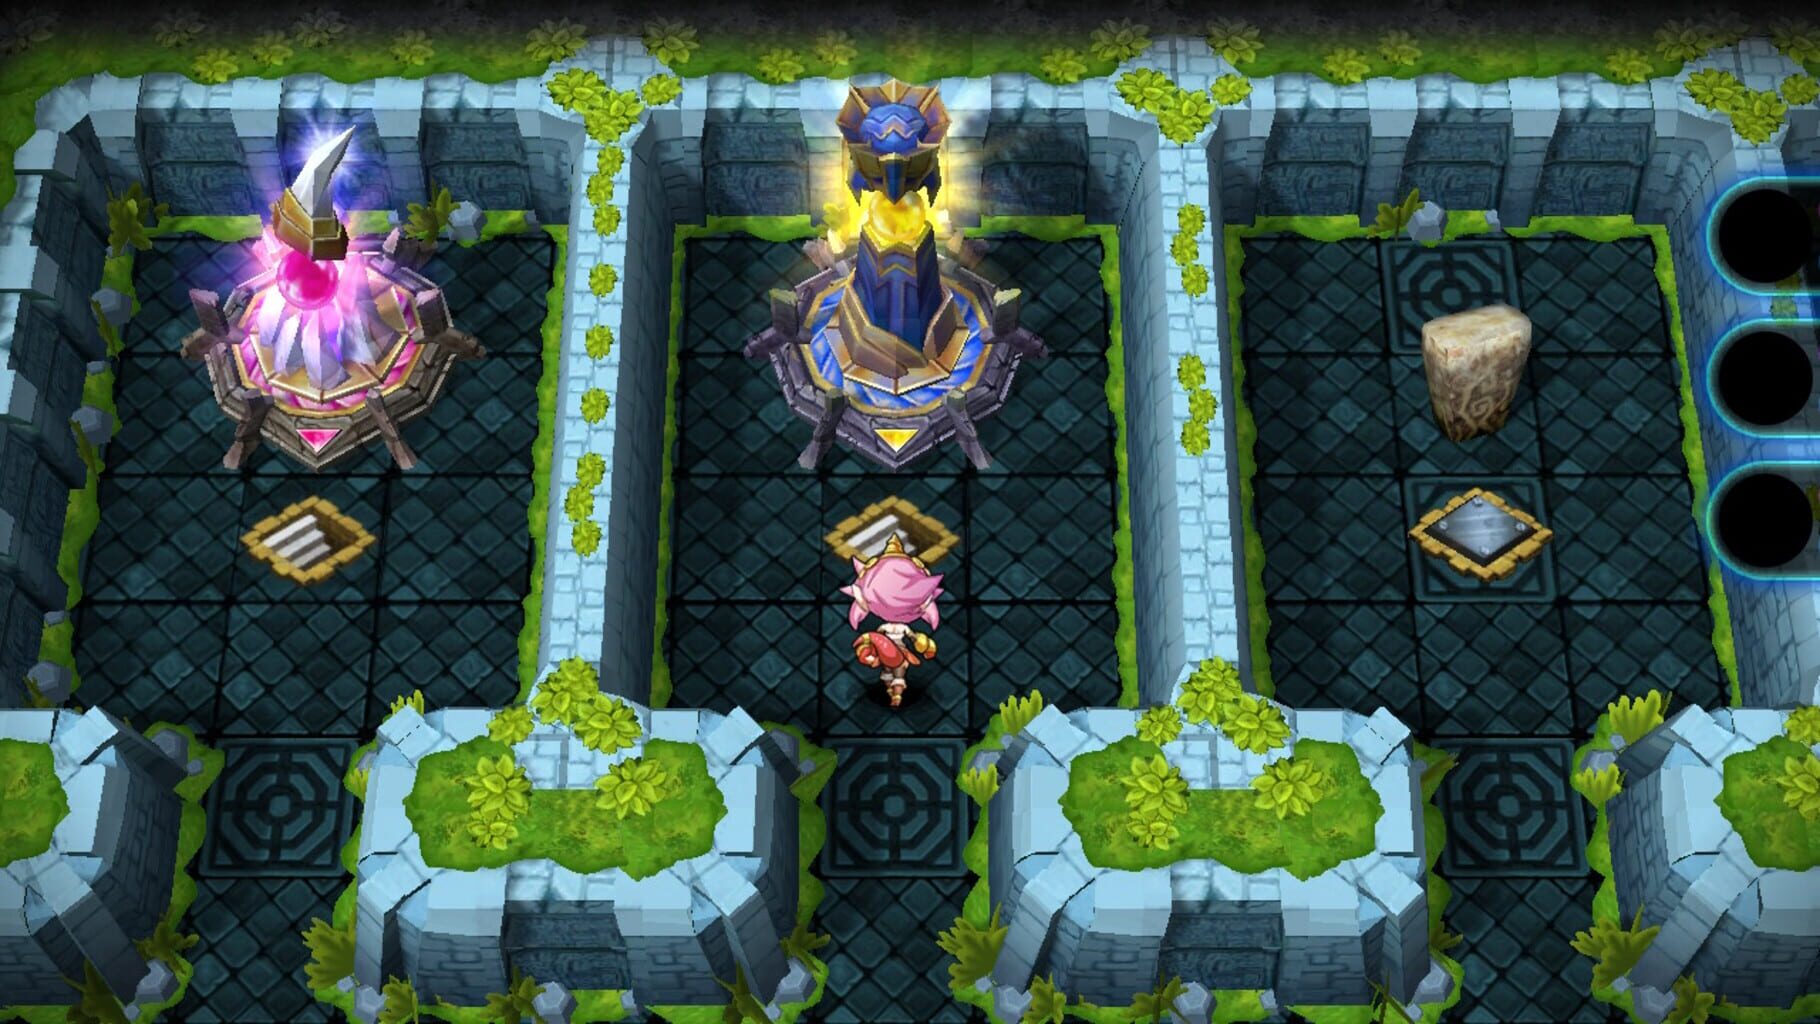 Dragon Fang Z: The Rose & Dungeon of Time - Extra Dungeon: The Inferno Hollow screenshot